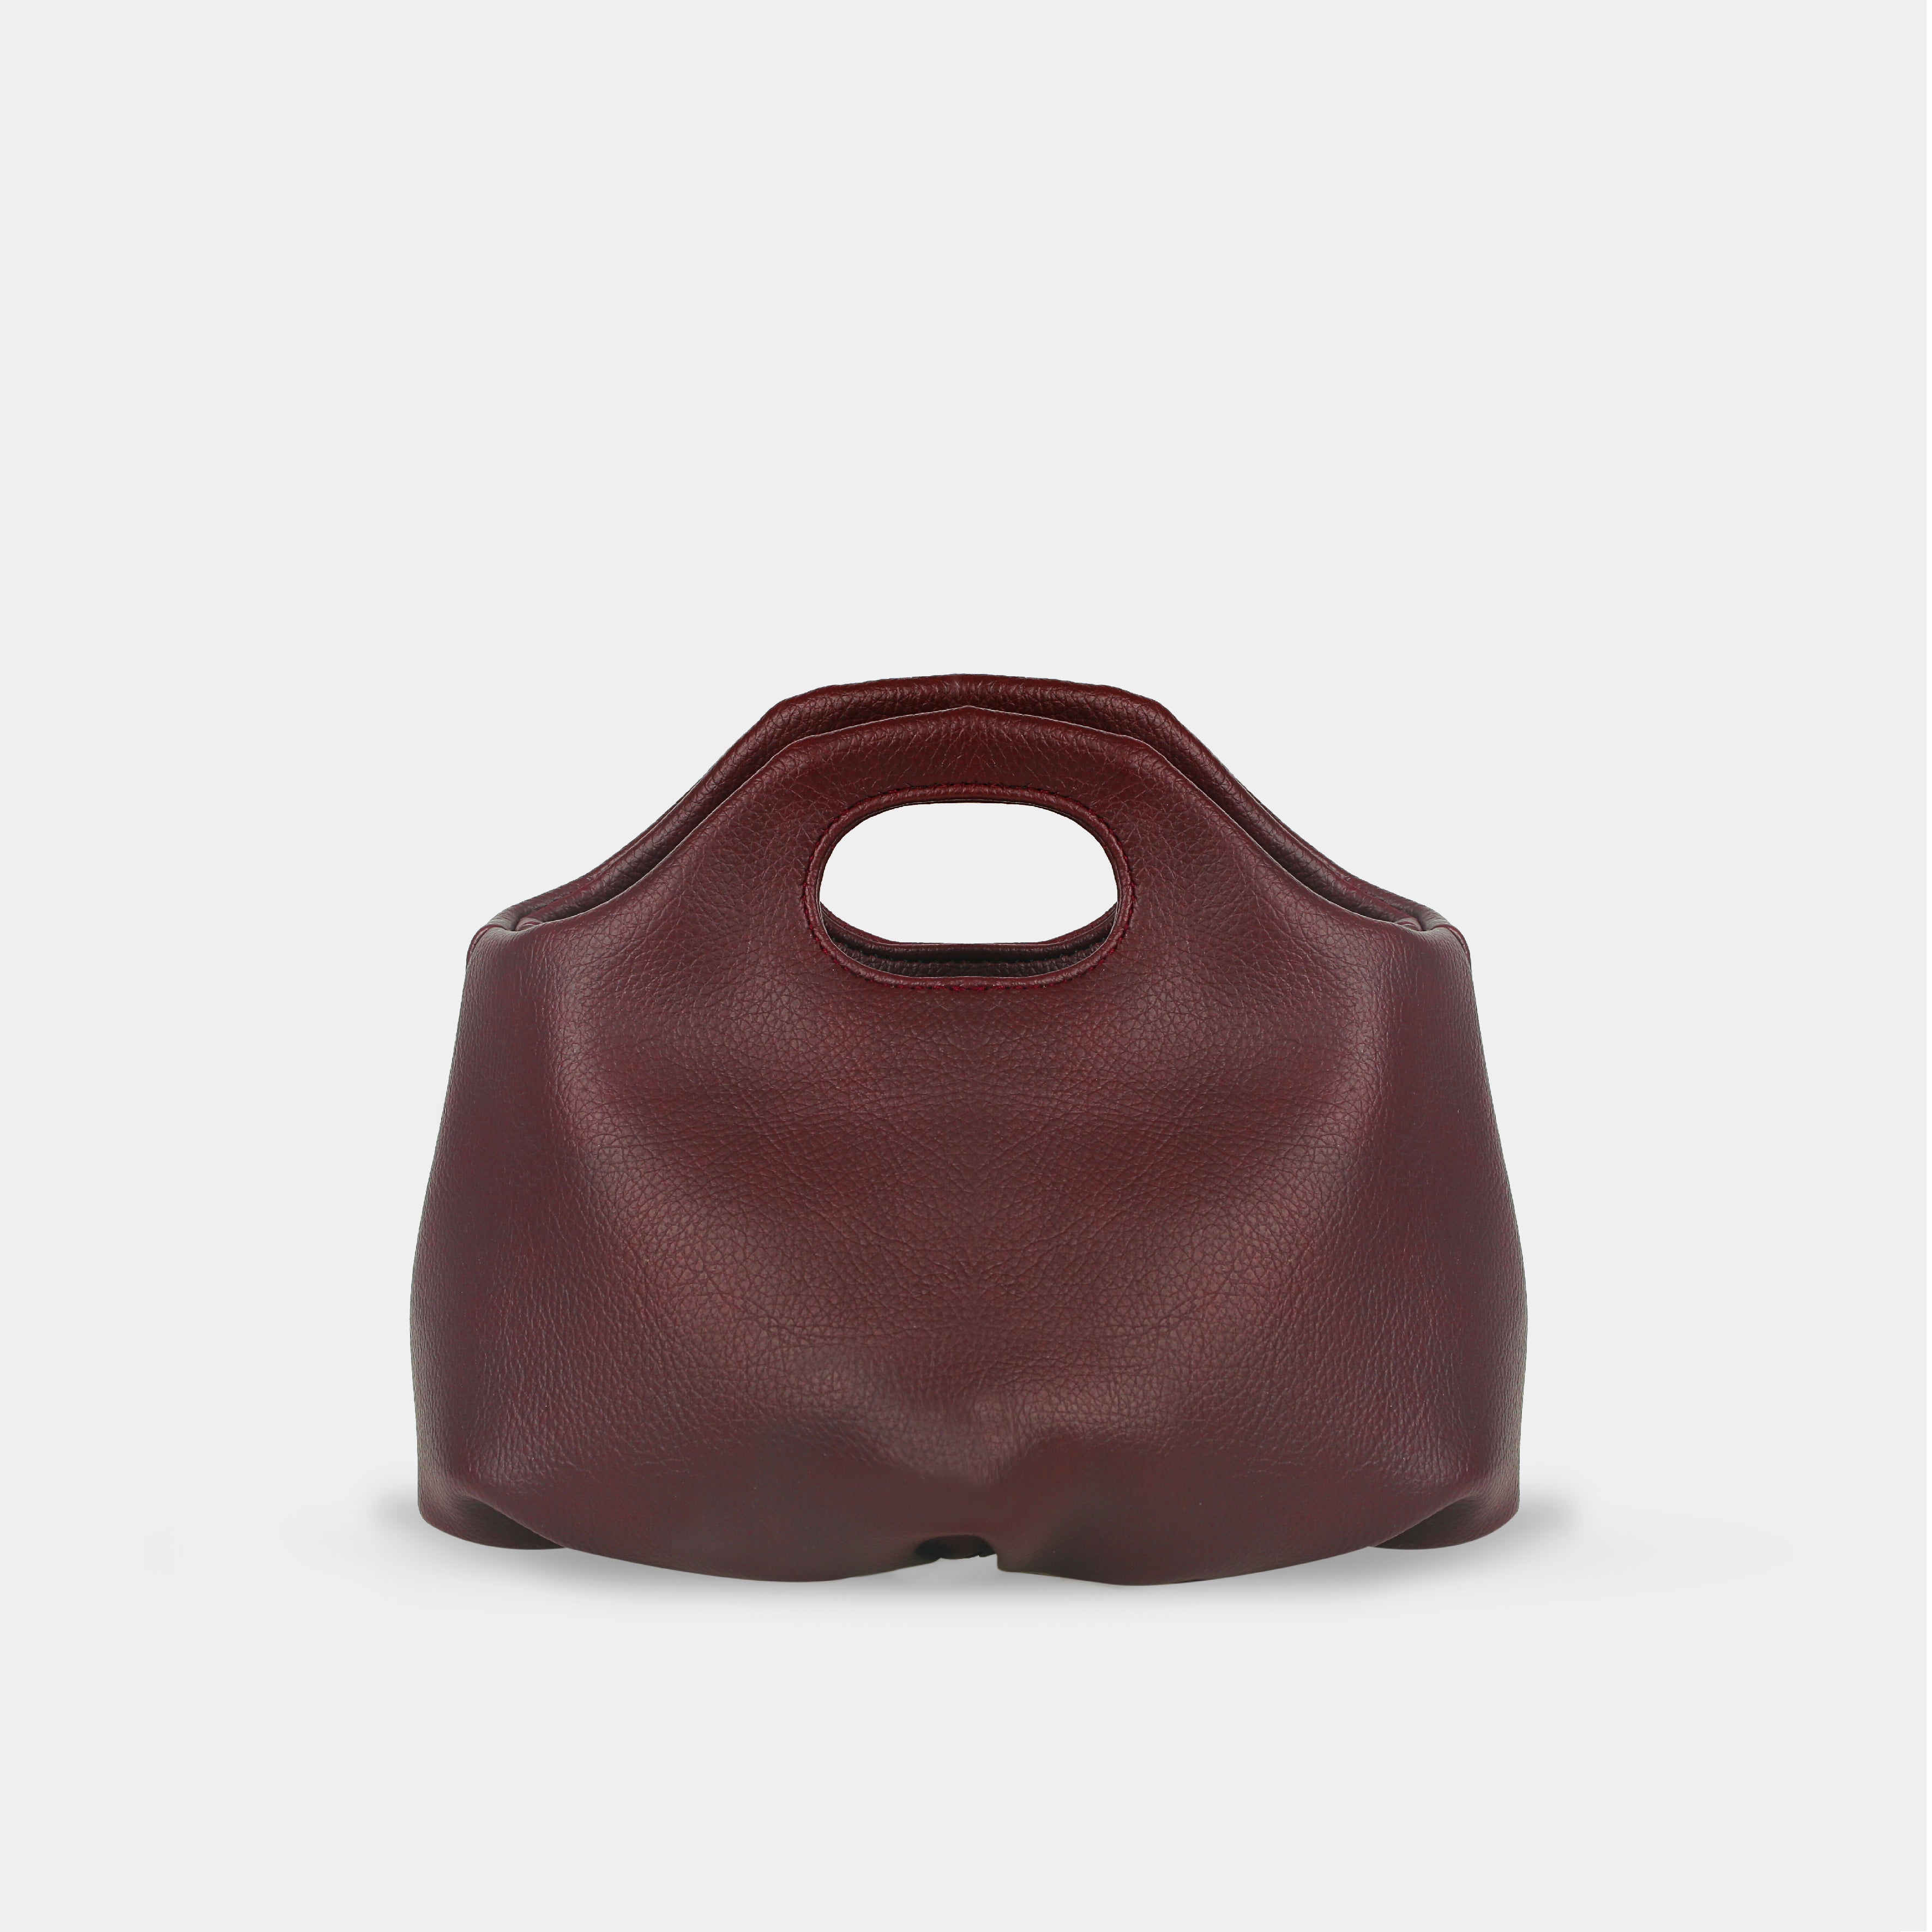 Flower Mini bag in red brown color